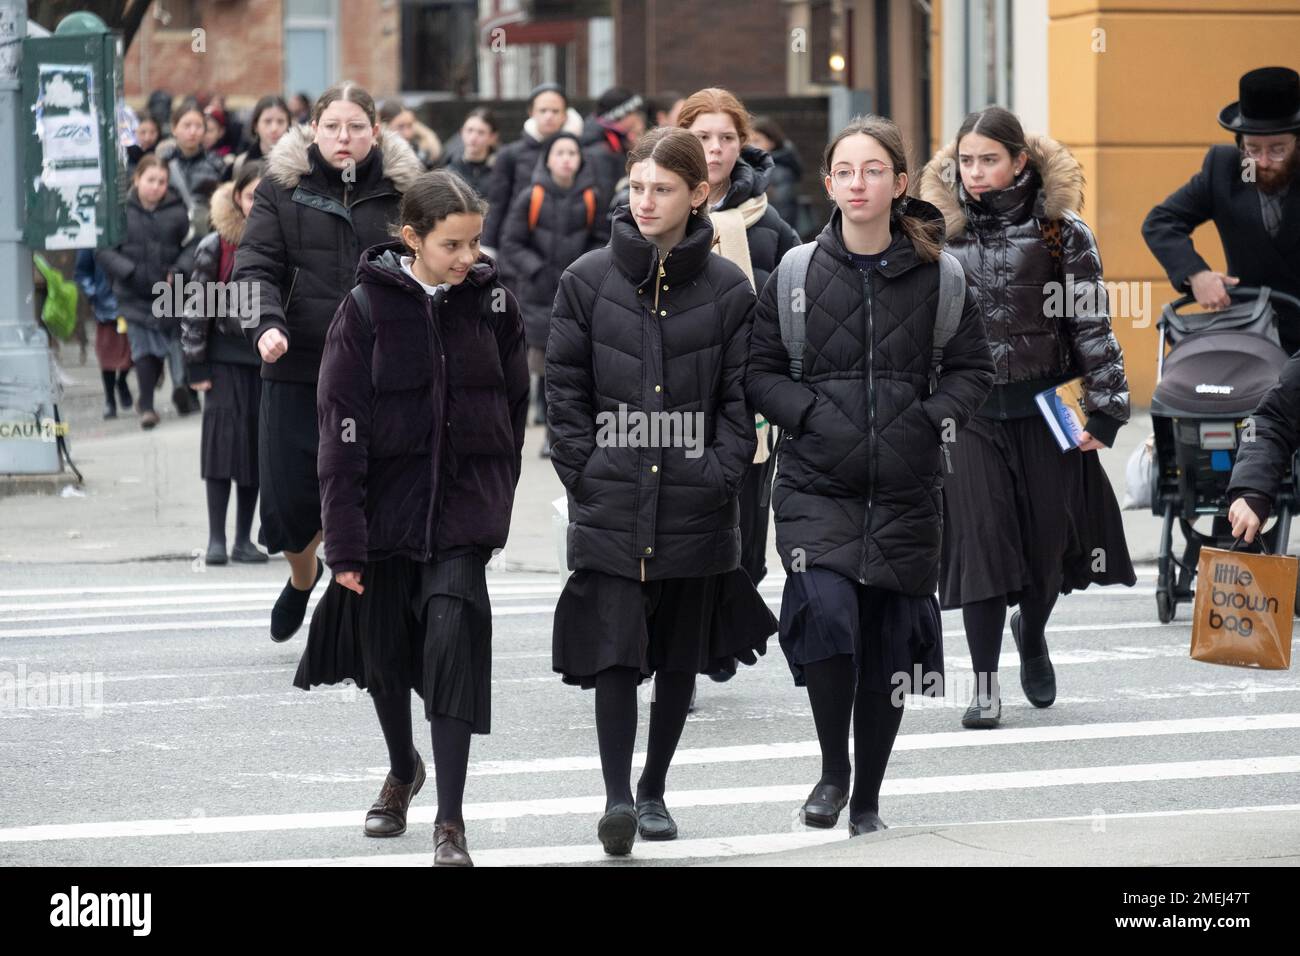 A street scene featuring ultra orthodox Jewish girls heading home from school.  All were dressed modestly in long black skirts. In Brooklyn, New York. Stock Photo